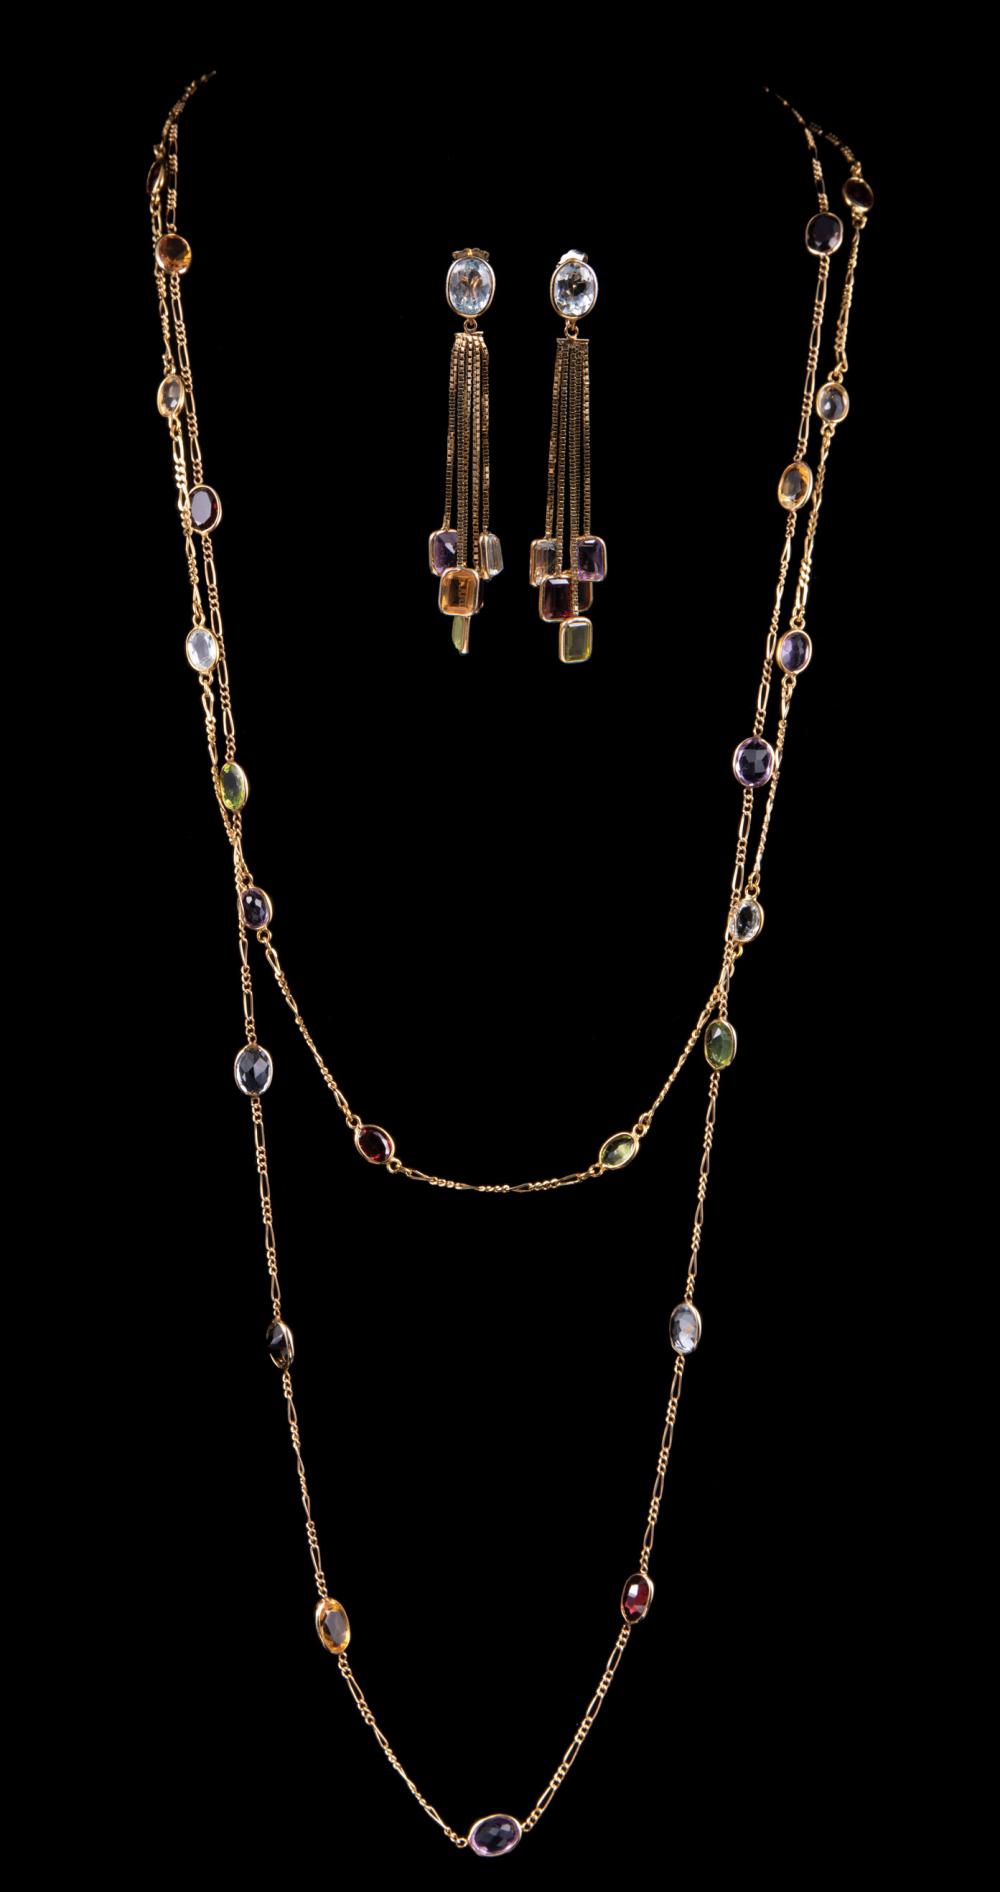 TWO 14 KT YELLOW GOLD AND GEMSET 31c0bc